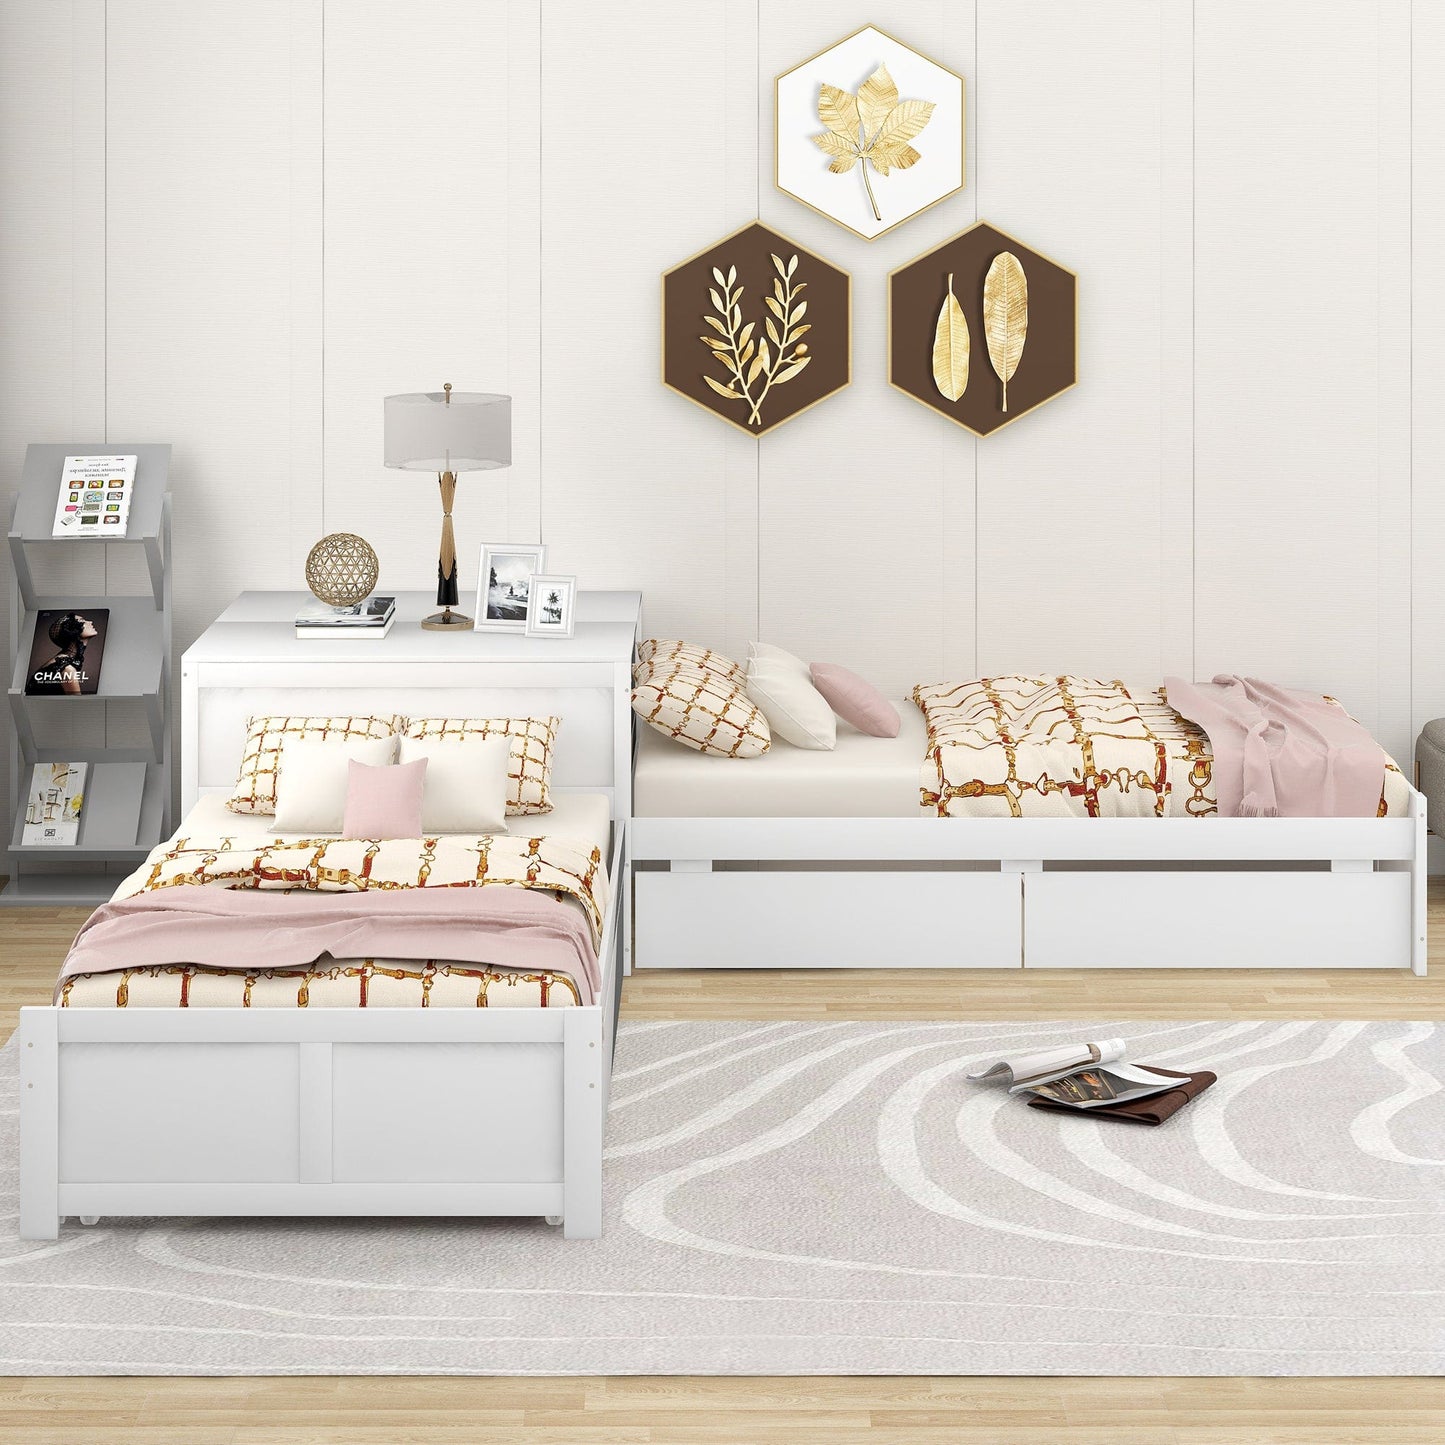 L-shaped Platform Bed with Trundle and Drawers Linked with built-in Flip Square Table,Twin,White